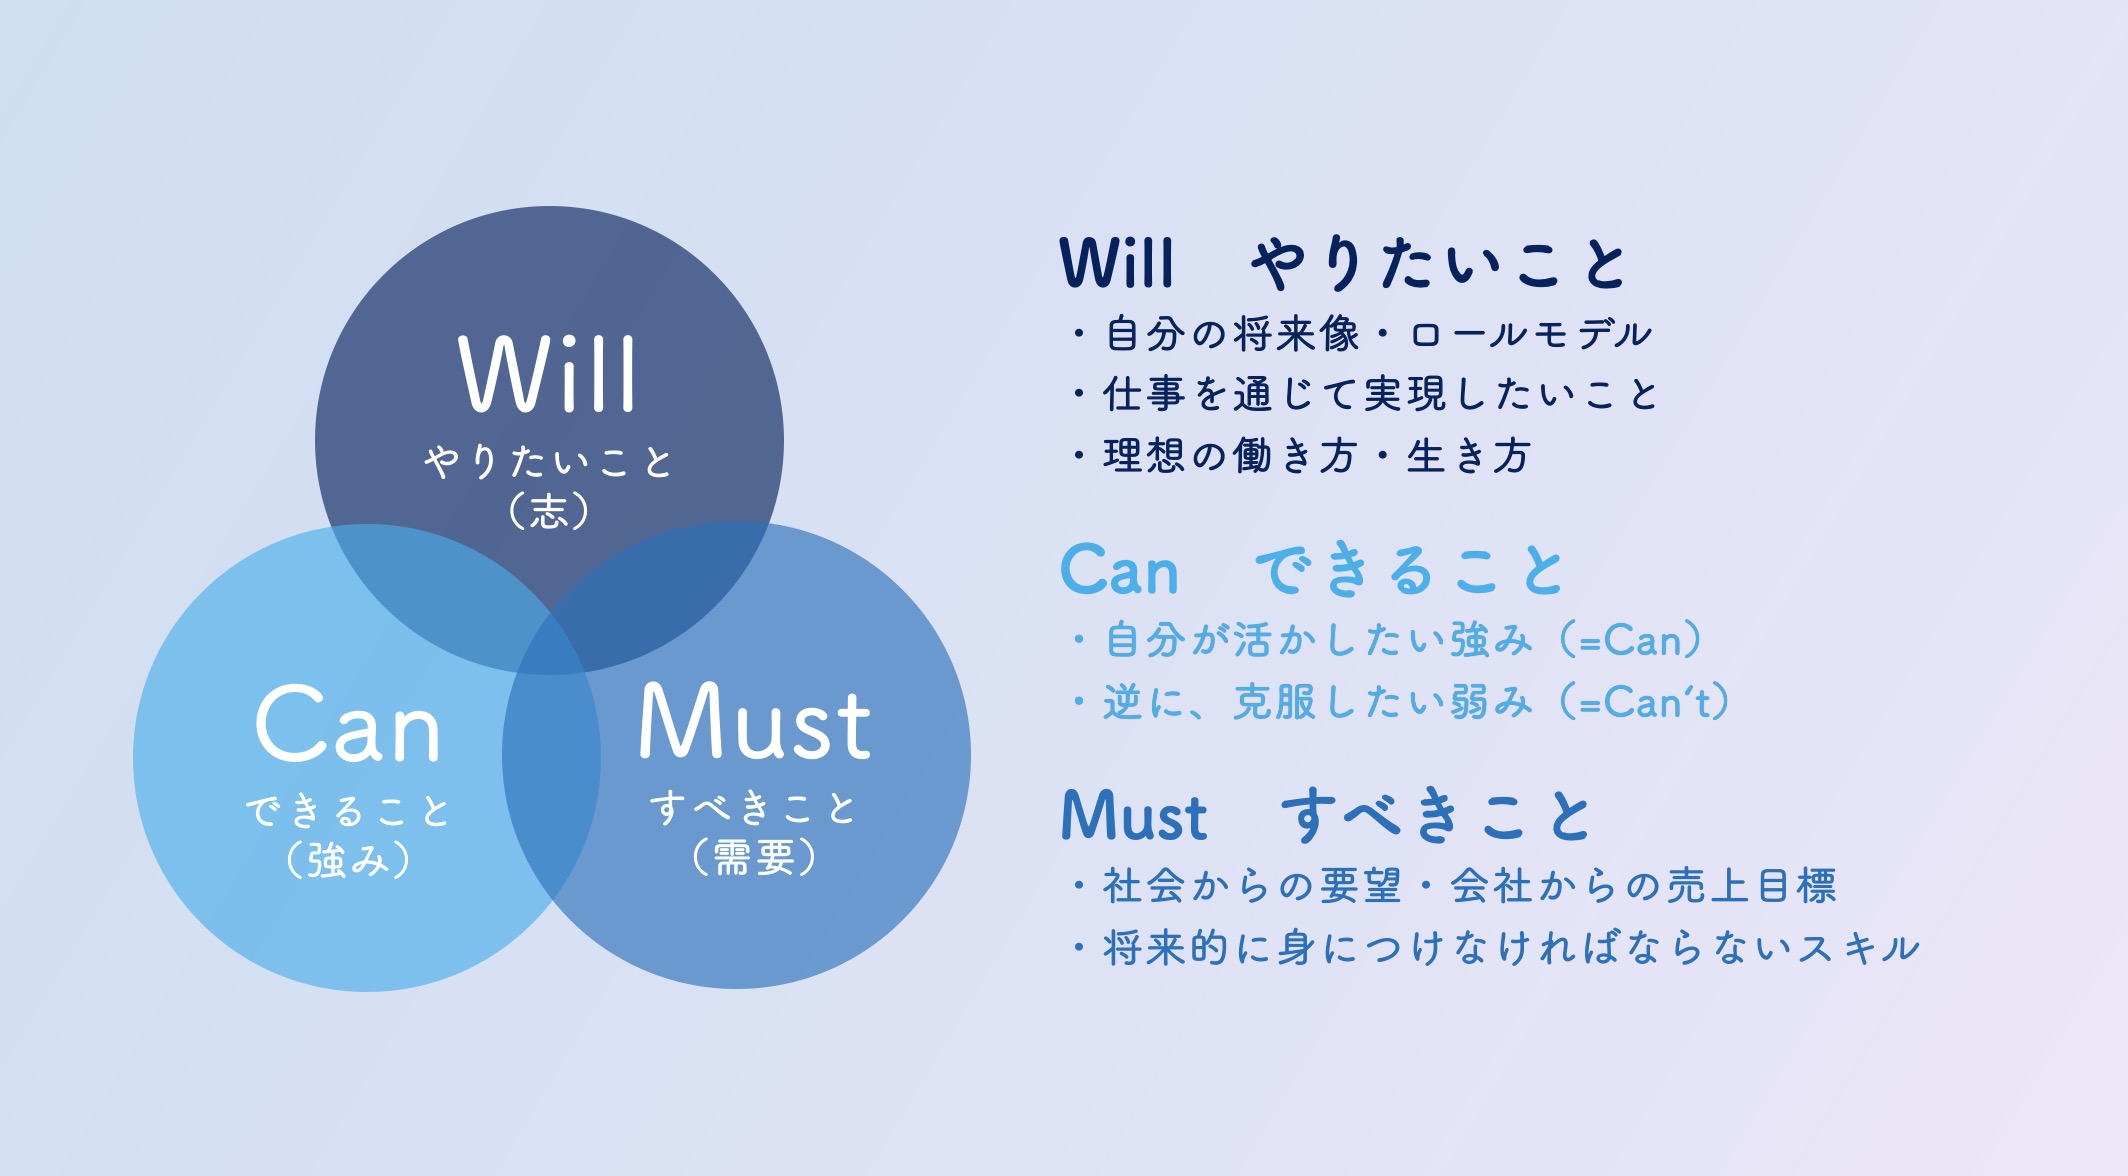 will-Can-Mustの図